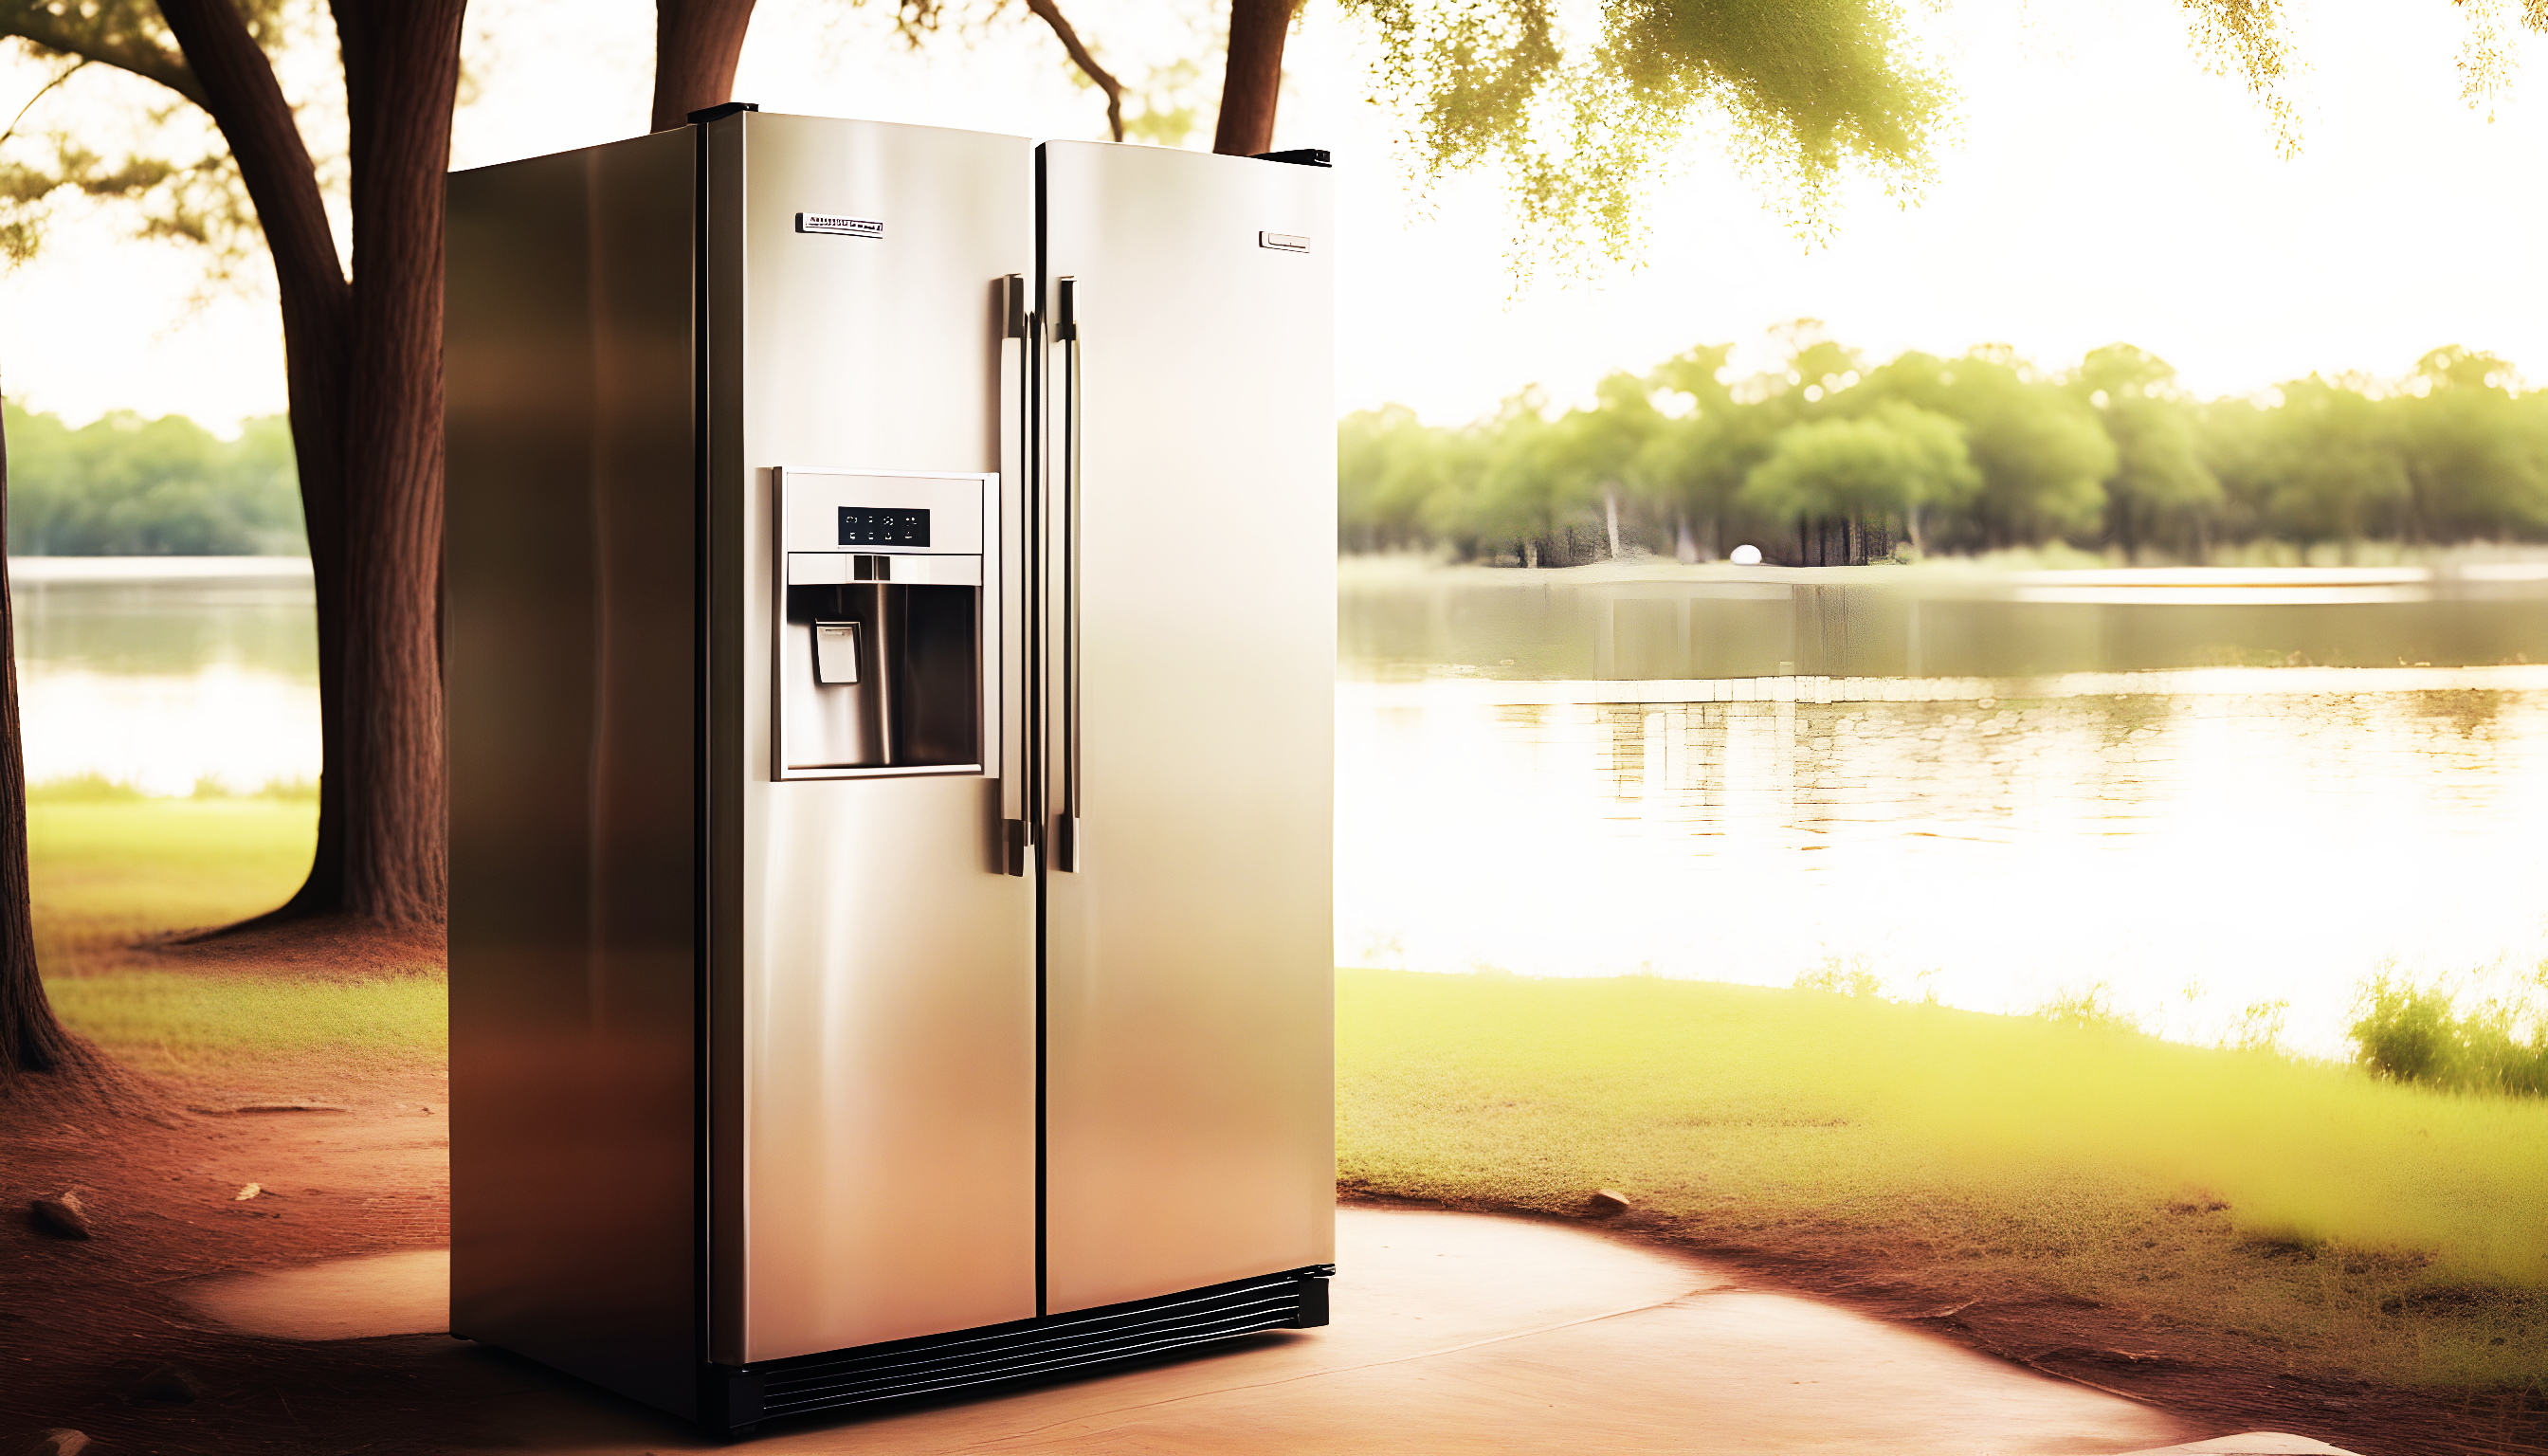 Appliance Repair Excellence: Modern Refrigerator Servicing with Lakeside View in Jonestown, Texas